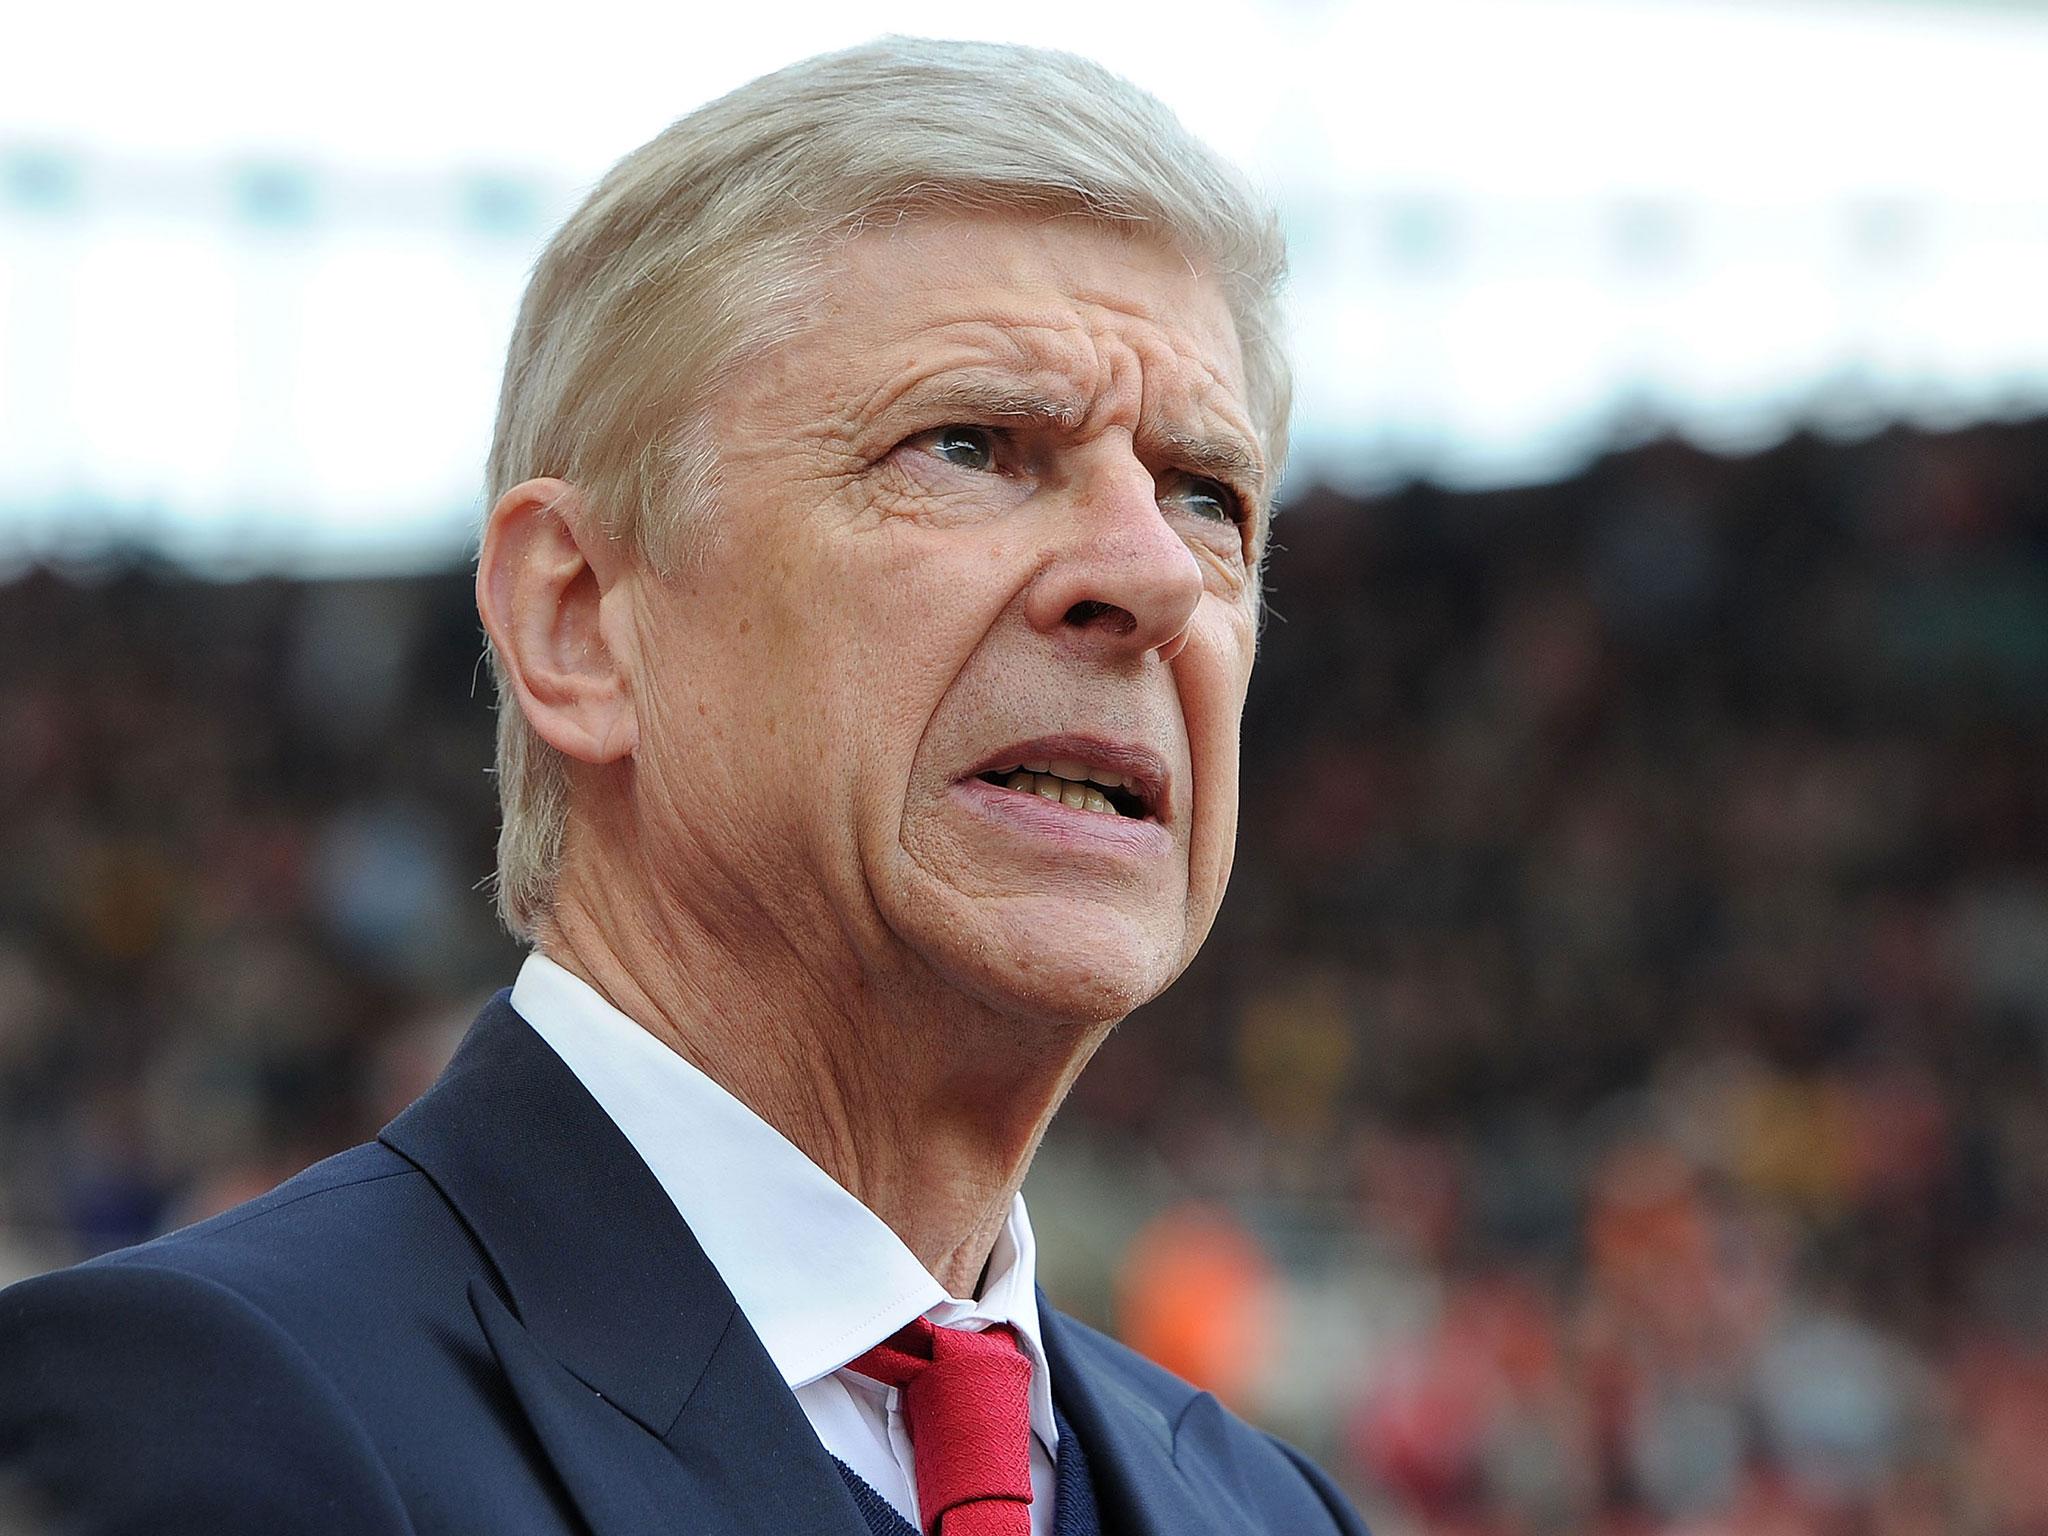 &#13;
Wenger feels sorry he could not give Perez more games &#13;